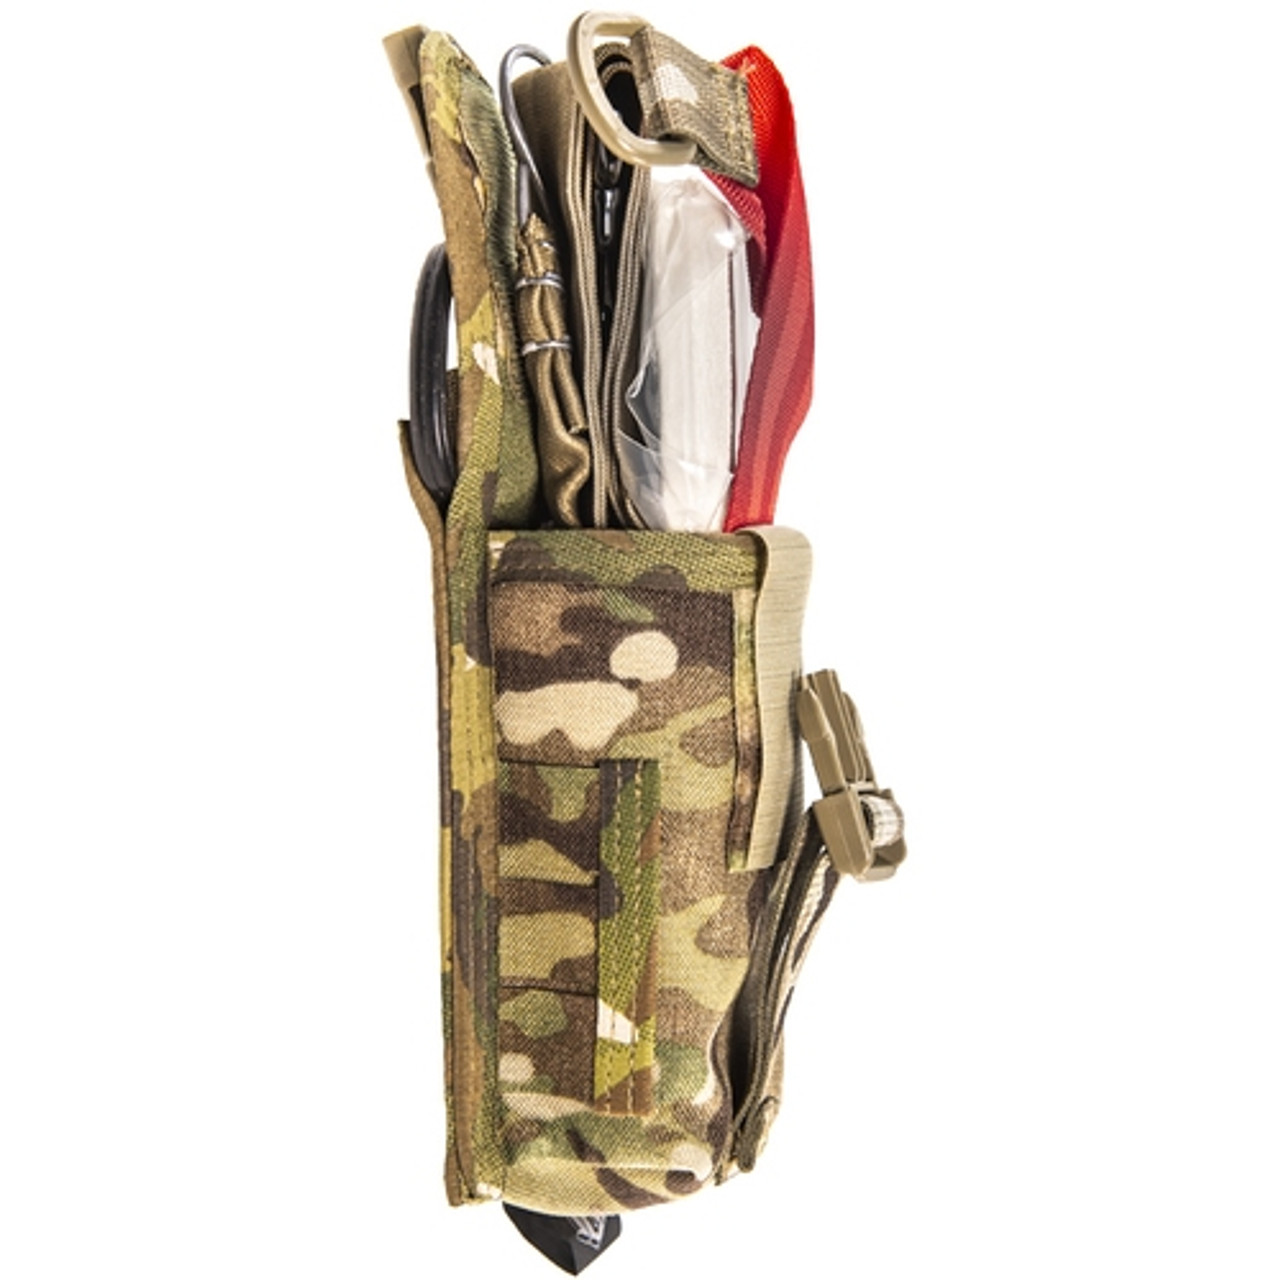 High Speed Gear® releases new, compact ReVive™ Medical Pouch